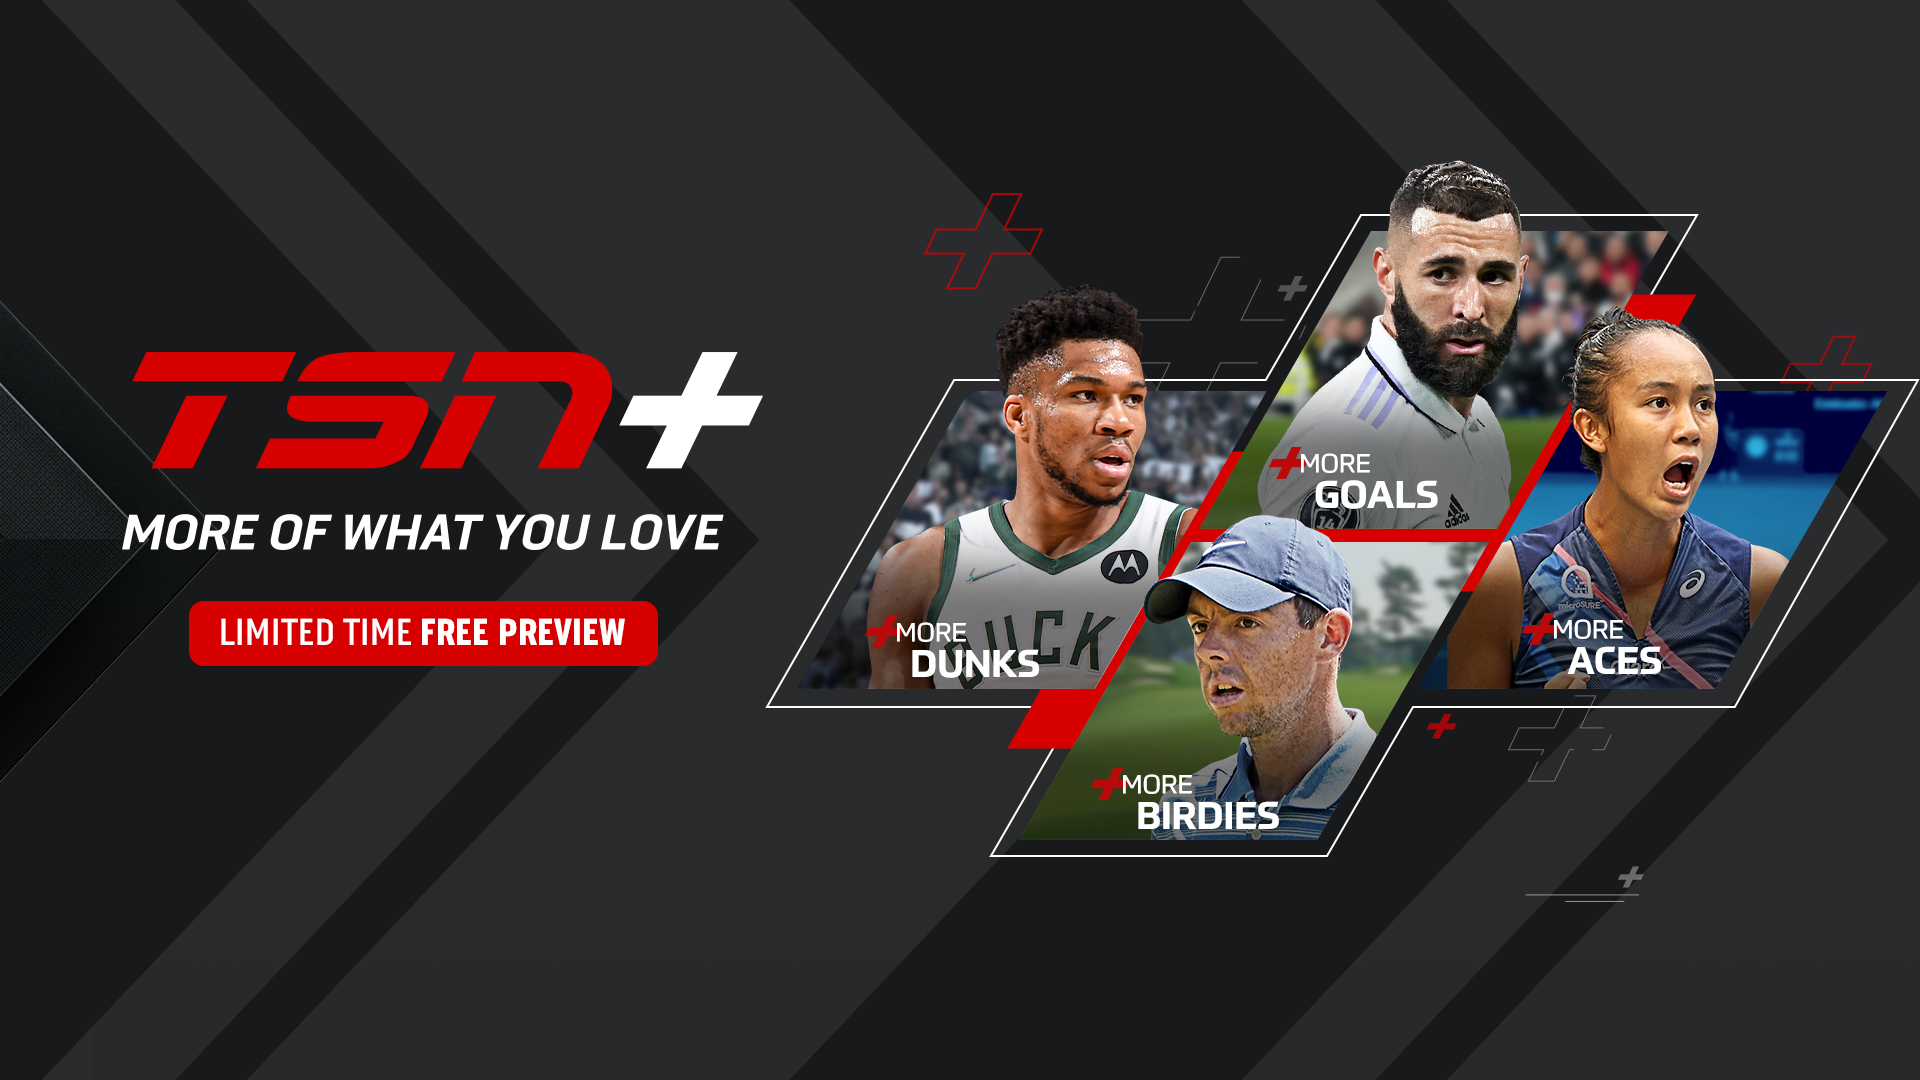 TSN Acquires Media Rights to PGA TOUR LIVE and Launches All-New Streaming Product TSN+, Available for Free Preview Beginning Today